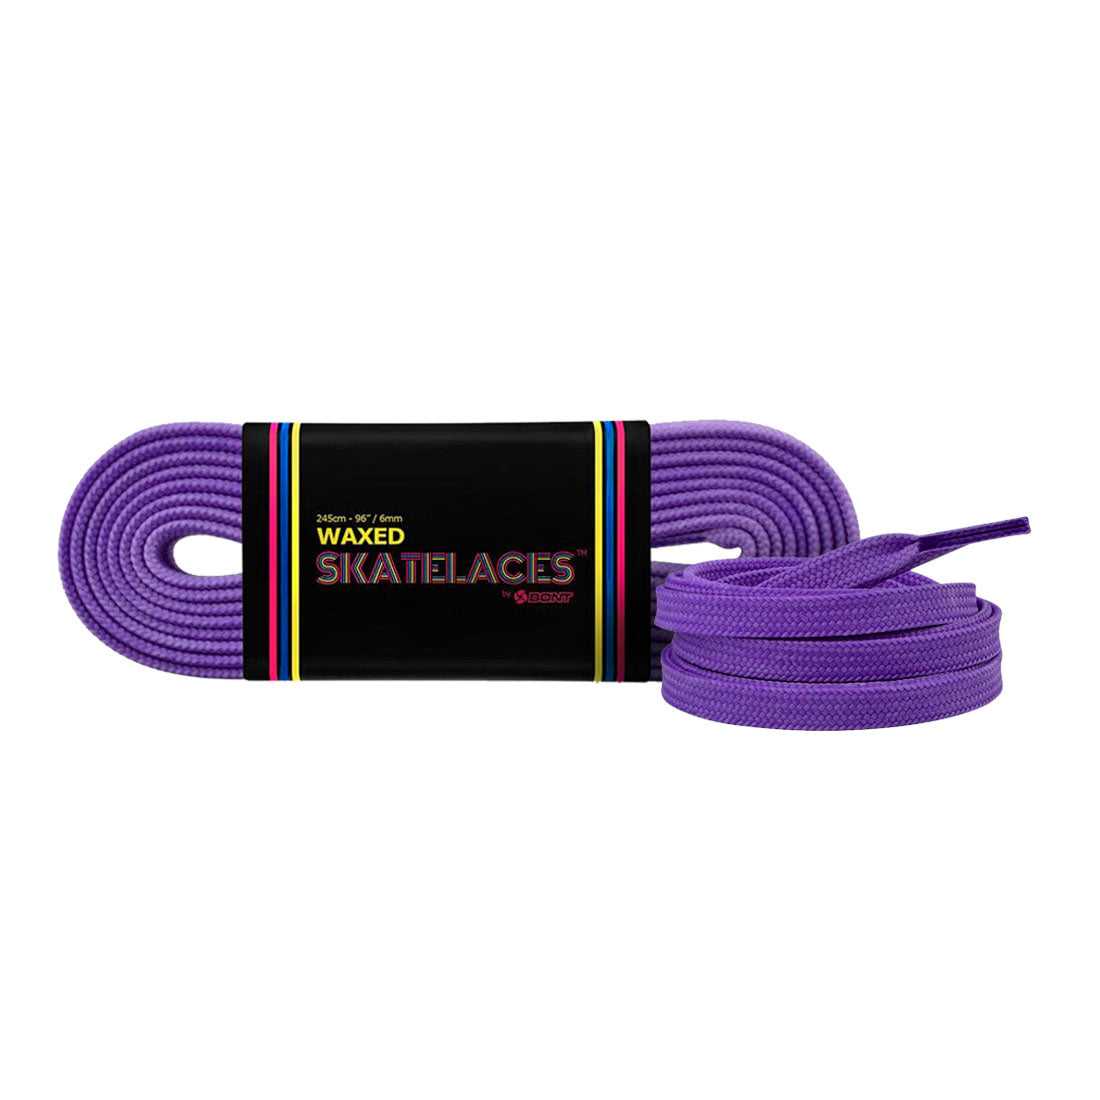 Bont Waxed 8mm Laces - 120cm/47in Dare You Purple Laces